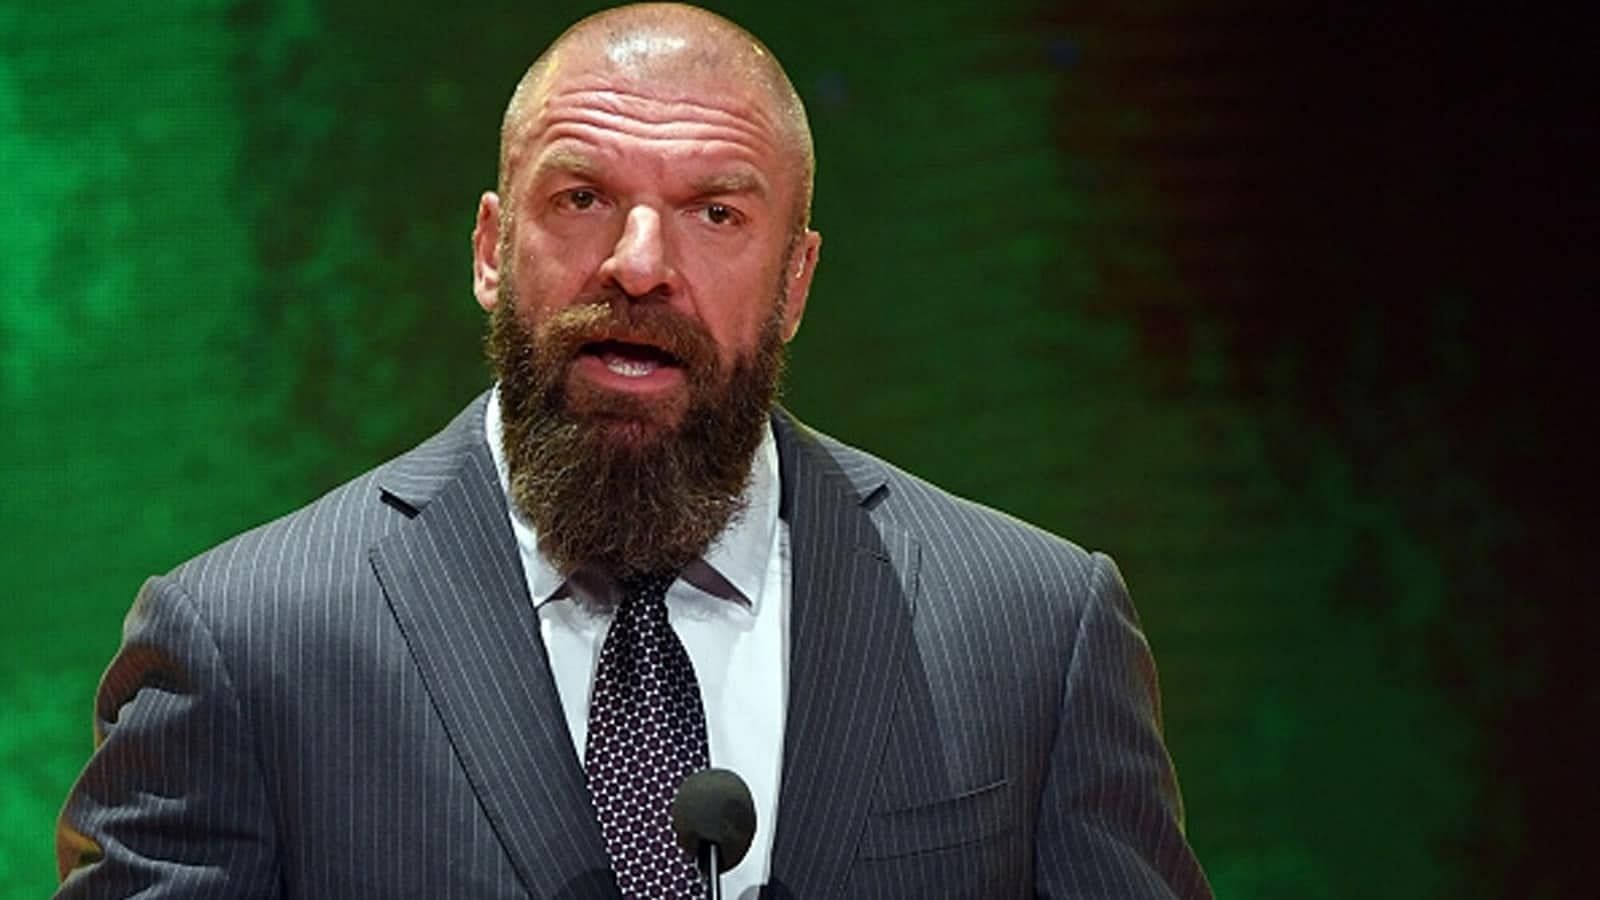 Triple H is the Chief Content officer of WWE.